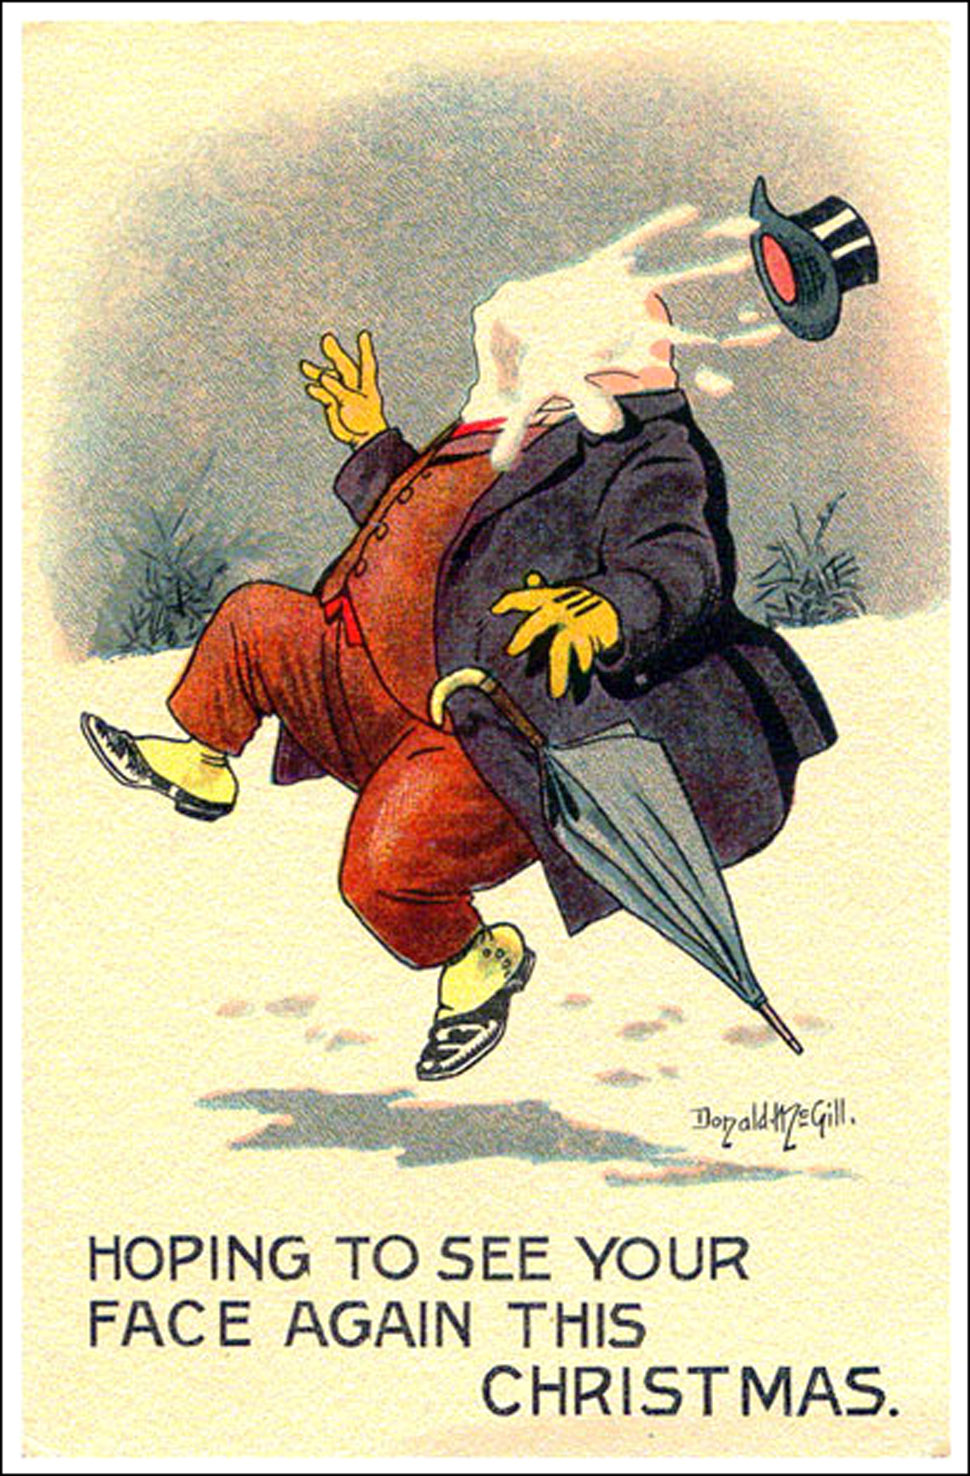 Man gets a snowball in the face - funny Christmas card by Donald mcGill